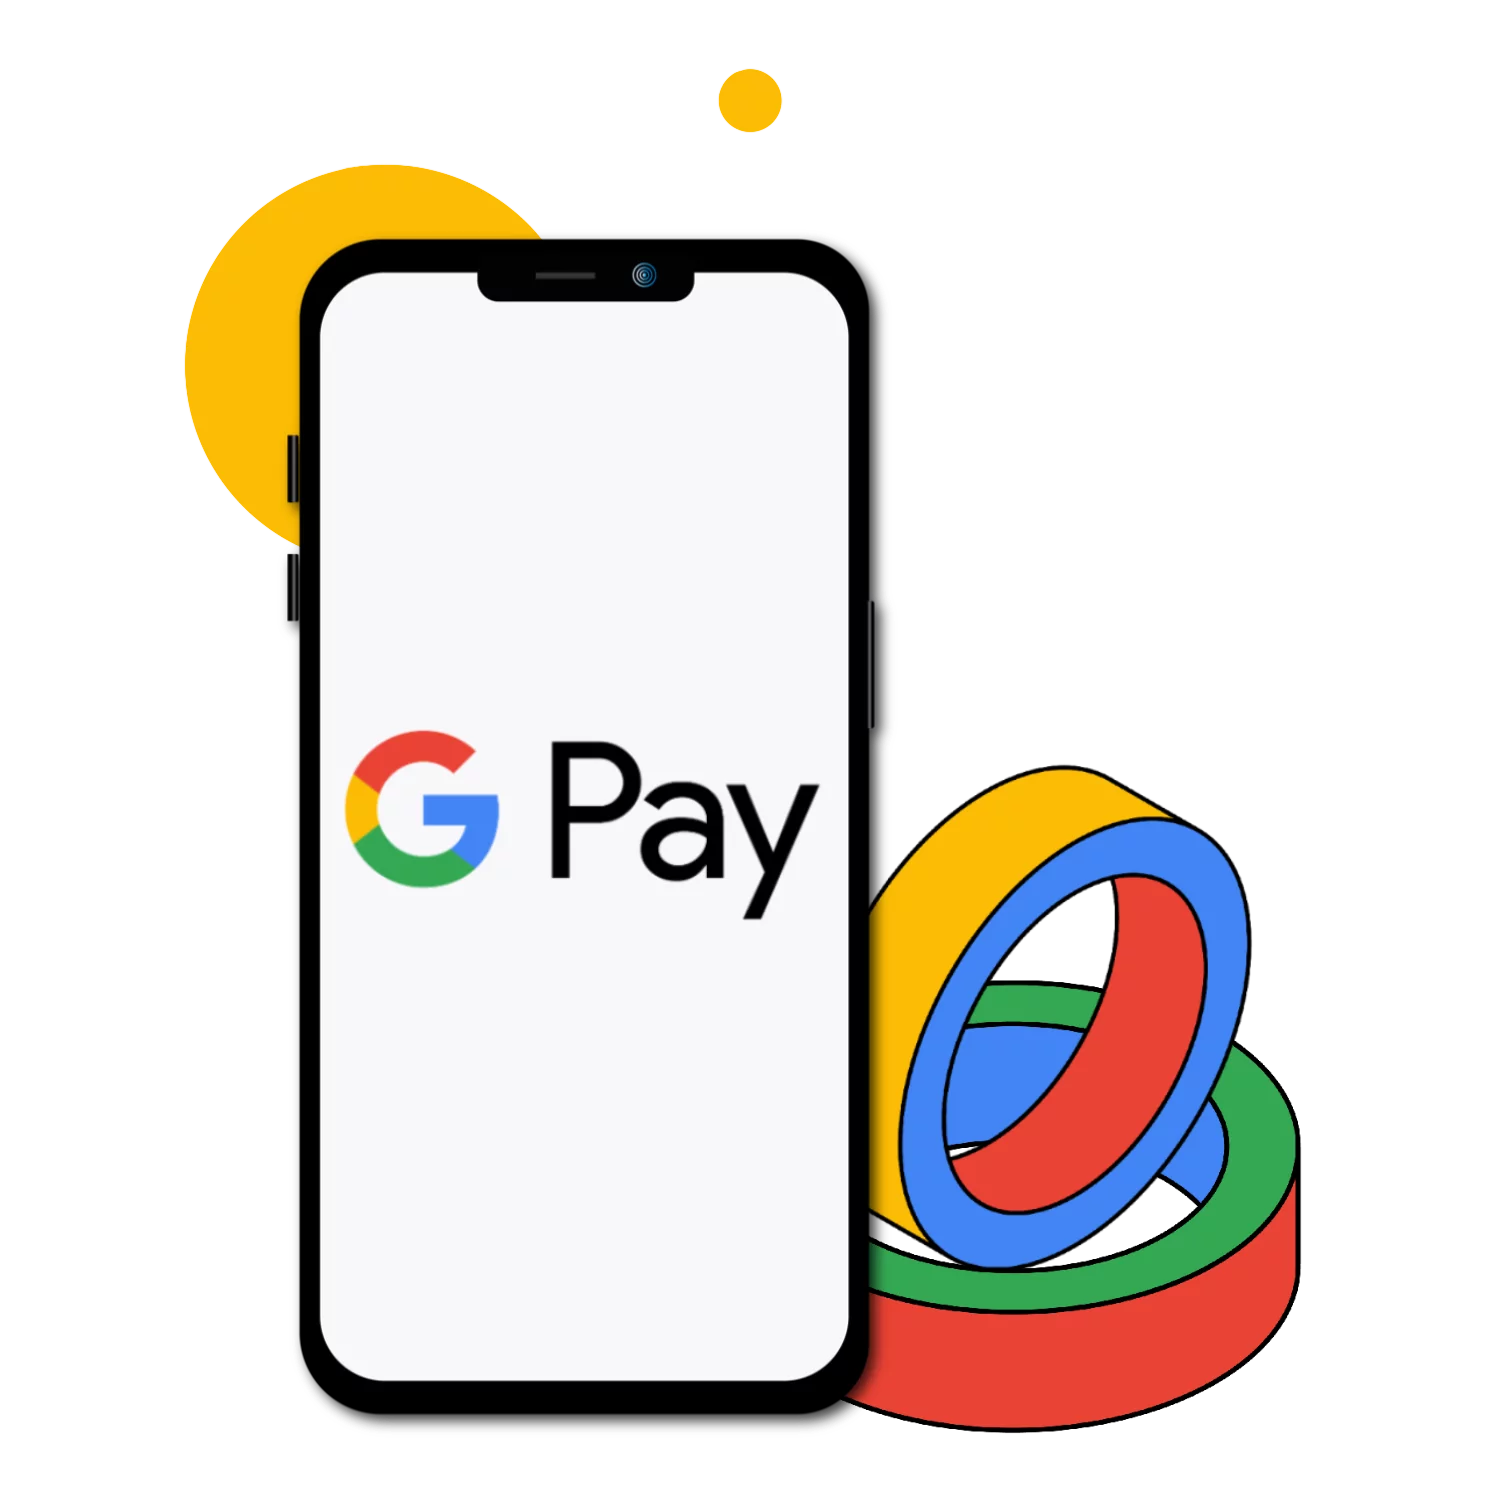 In this article, we explain how to use Google Pay for betting in India.